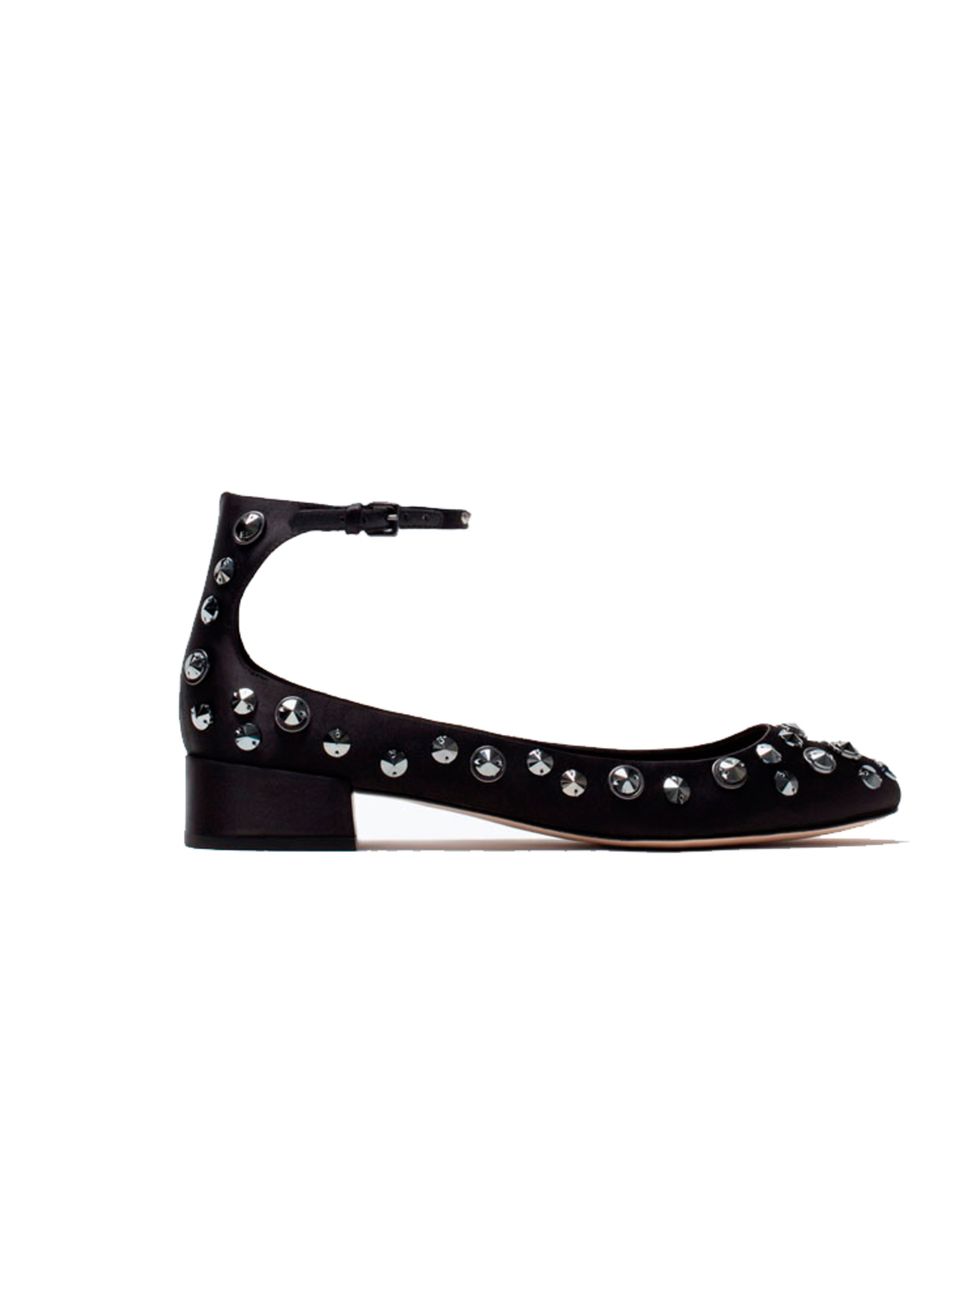 <p>Pretty enough for evening, practical enough for day (which equals guilt-free shopping).</p>

<p><a href="http://www.zara.com/uk/en/woman/shoes/studded-ballerina-flats-c269191p2443516.html" target="_blank">Zara</a> ballerina flats, £49.99</p>